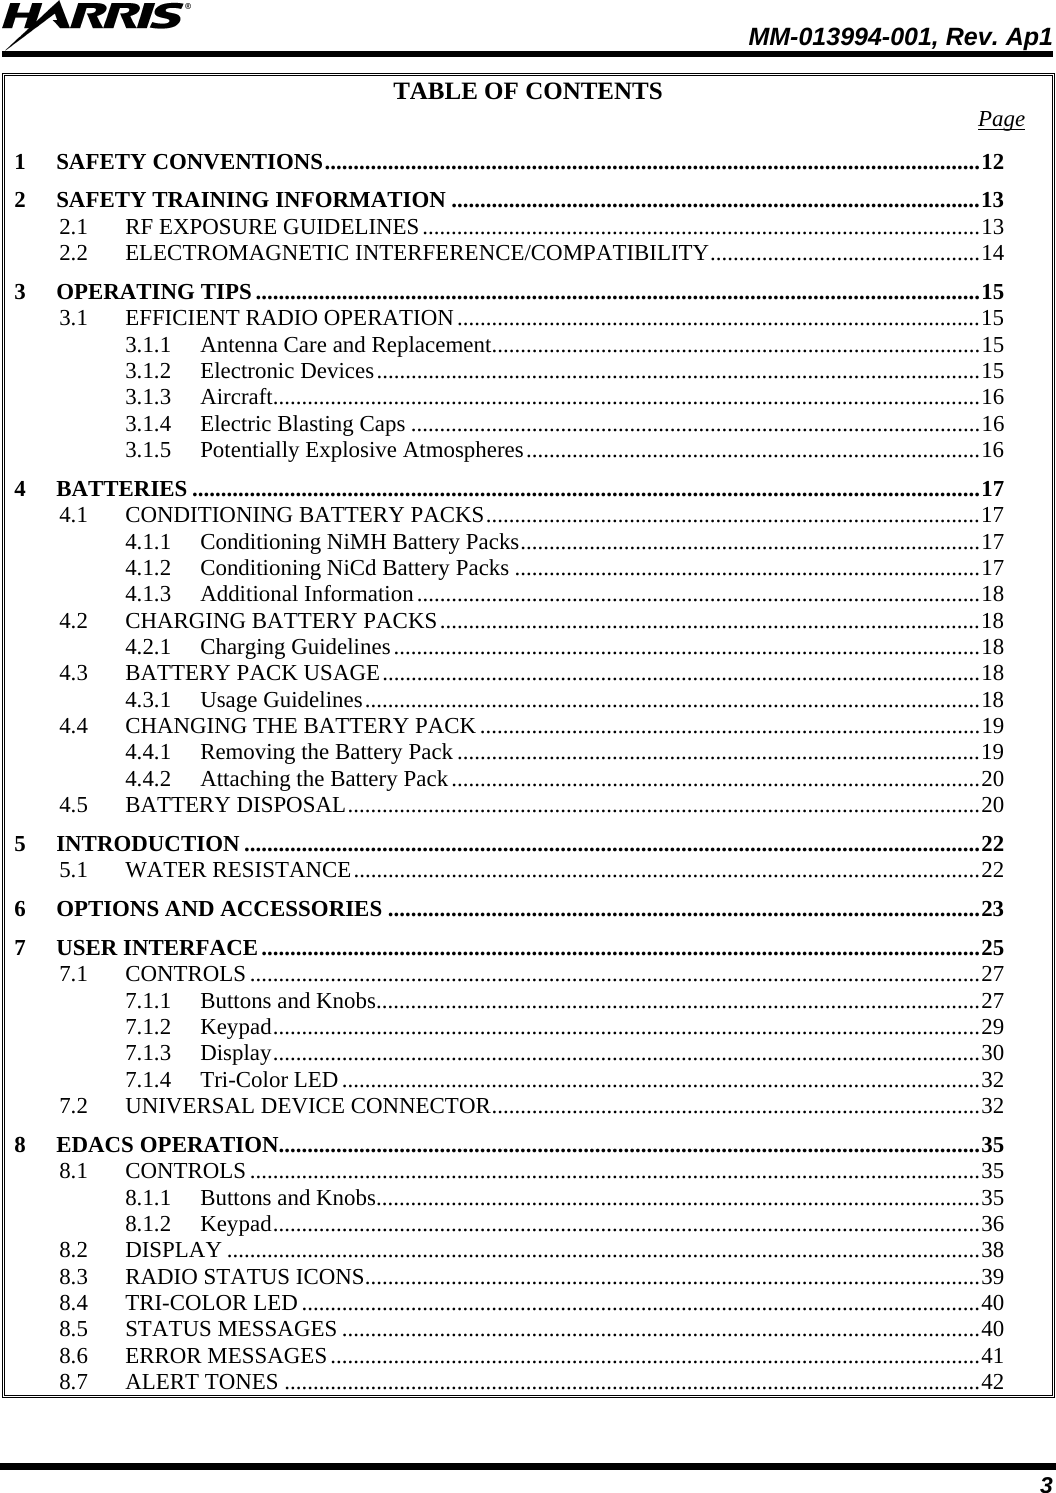  MM-013994-001, Rev. Ap1 3 TABLE OF CONTENTS  Page 1 SAFETY CONVENTIONS..................................................................................................................12 2 SAFETY TRAINING INFORMATION ............................................................................................13 2.1 RF EXPOSURE GUIDELINES.................................................................................................13 2.2 ELECTROMAGNETIC INTERFERENCE/COMPATIBILITY...............................................14 3 OPERATING TIPS ..............................................................................................................................15 3.1 EFFICIENT RADIO OPERATION...........................................................................................15 3.1.1 Antenna Care and Replacement.....................................................................................15 3.1.2 Electronic Devices.........................................................................................................15 3.1.3 Aircraft...........................................................................................................................16 3.1.4 Electric Blasting Caps ...................................................................................................16 3.1.5 Potentially Explosive Atmospheres...............................................................................16 4 BATTERIES .........................................................................................................................................17 4.1 CONDITIONING BATTERY PACKS......................................................................................17 4.1.1 Conditioning NiMH Battery Packs................................................................................17 4.1.2 Conditioning NiCd Battery Packs .................................................................................17 4.1.3 Additional Information..................................................................................................18 4.2 CHARGING BATTERY PACKS..............................................................................................18 4.2.1 Charging Guidelines......................................................................................................18 4.3 BATTERY PACK USAGE........................................................................................................18 4.3.1 Usage Guidelines...........................................................................................................18 4.4 CHANGING THE BATTERY PACK .......................................................................................19 4.4.1 Removing the Battery Pack ...........................................................................................19 4.4.2 Attaching the Battery Pack............................................................................................20 4.5 BATTERY DISPOSAL..............................................................................................................20 5 INTRODUCTION ................................................................................................................................22 5.1 WATER RESISTANCE.............................................................................................................22 6 OPTIONS AND ACCESSORIES .......................................................................................................23 7 USER INTERFACE.............................................................................................................................25 7.1 CONTROLS...............................................................................................................................27 7.1.1 Buttons and Knobs.........................................................................................................27 7.1.2 Keypad...........................................................................................................................29 7.1.3 Display...........................................................................................................................30 7.1.4 Tri-Color LED...............................................................................................................32 7.2 UNIVERSAL DEVICE CONNECTOR.....................................................................................32 8 EDACS OPERATION..........................................................................................................................35 8.1 CONTROLS...............................................................................................................................35 8.1.1 Buttons and Knobs.........................................................................................................35 8.1.2 Keypad...........................................................................................................................36 8.2 DISPLAY ...................................................................................................................................38 8.3 RADIO STATUS ICONS...........................................................................................................39 8.4 TRI-COLOR LED......................................................................................................................40 8.5 STATUS MESSAGES ...............................................................................................................40 8.6 ERROR MESSAGES.................................................................................................................41 8.7 ALERT TONES .........................................................................................................................42 